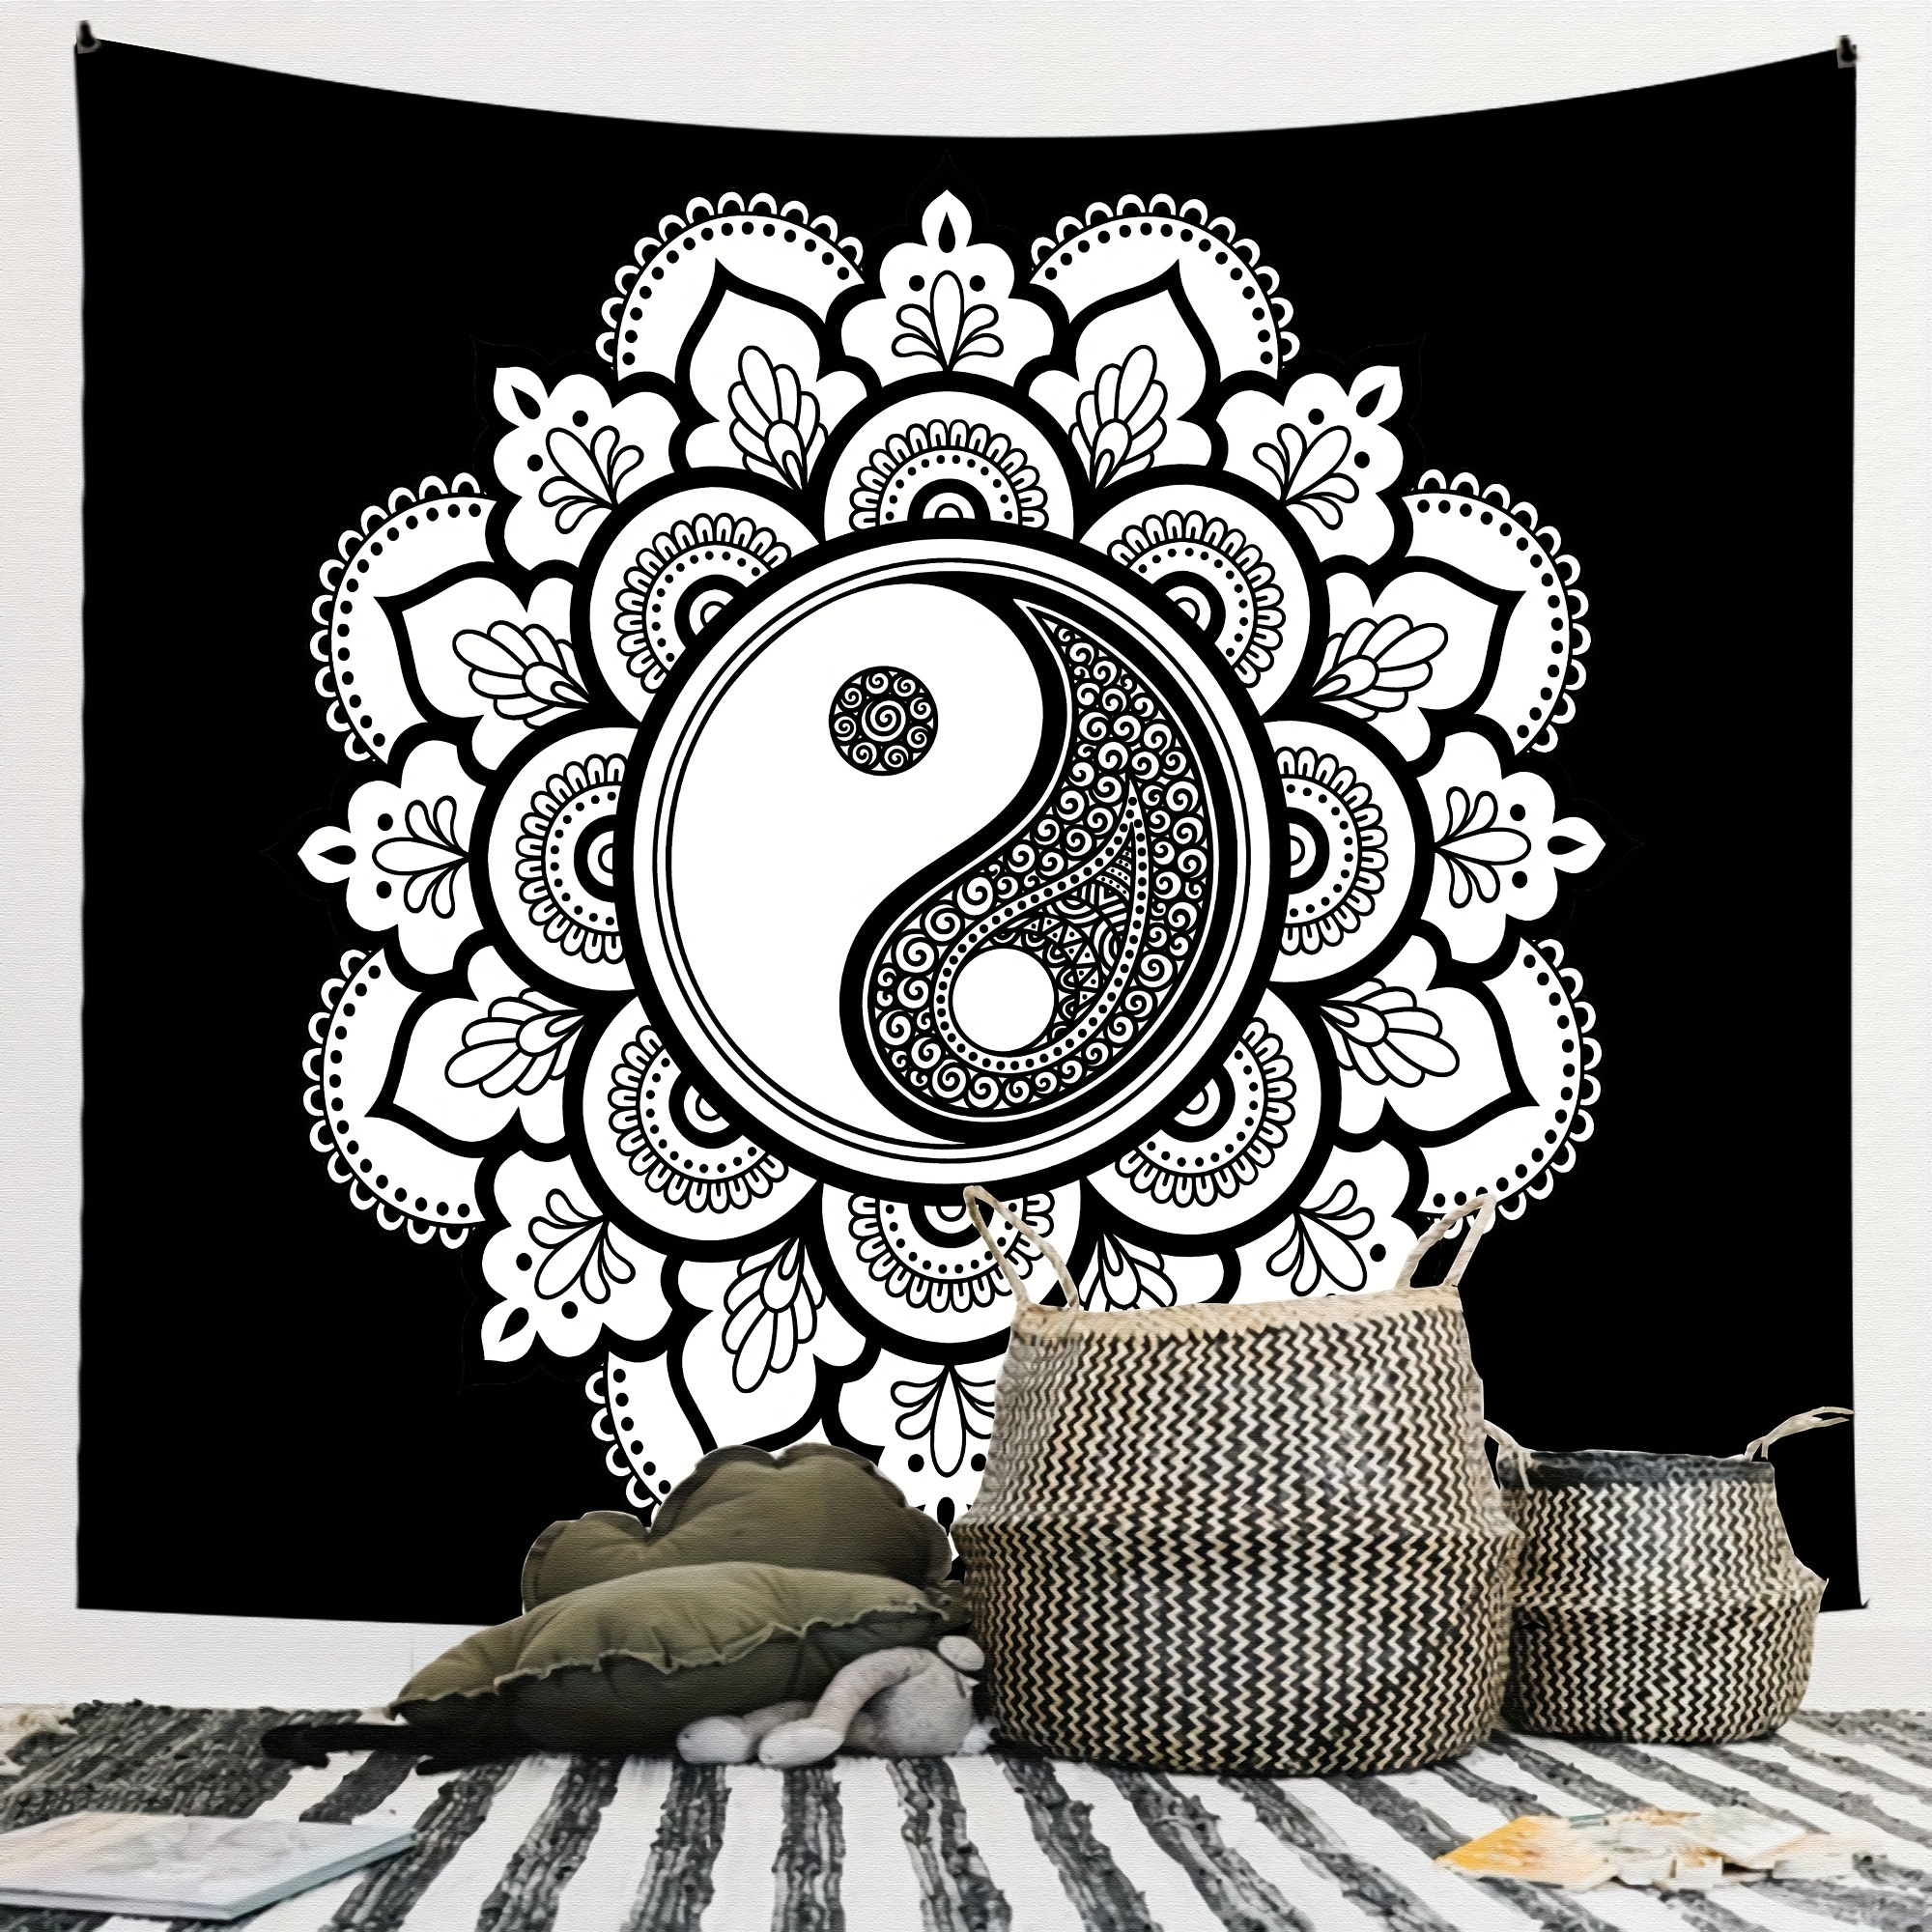 

1pc Black And White Mandala Tai Chi Peach Skin Velvet Tapestry Fashionable Nordic Zen Style Decorative Cloth Mandala Multi Functional Wall Hanging Tapestry For Living Room Home Decor